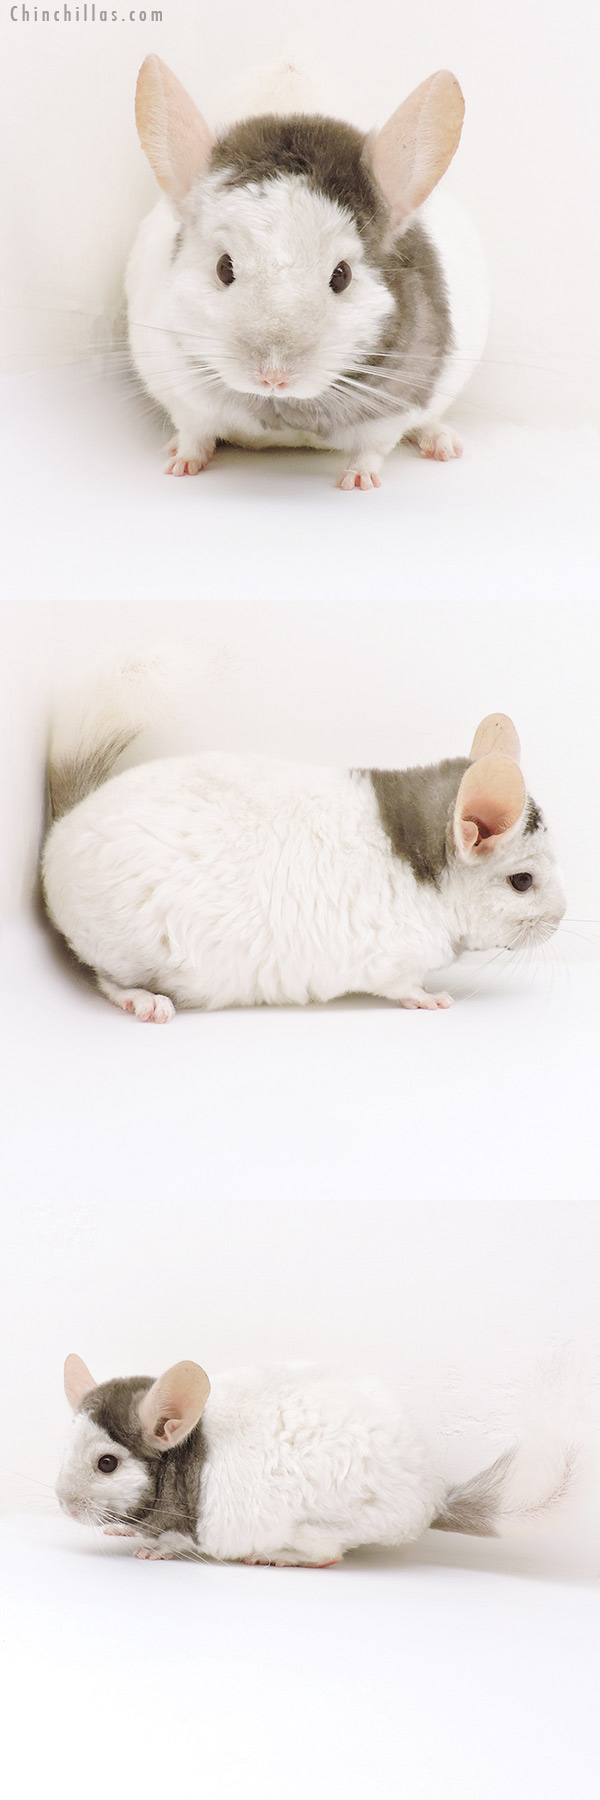 Chinchilla or related item offered for sale or export on Chinchillas.com - 18195 Extreme Tan and White Mosaic Locken Female Chinchilla